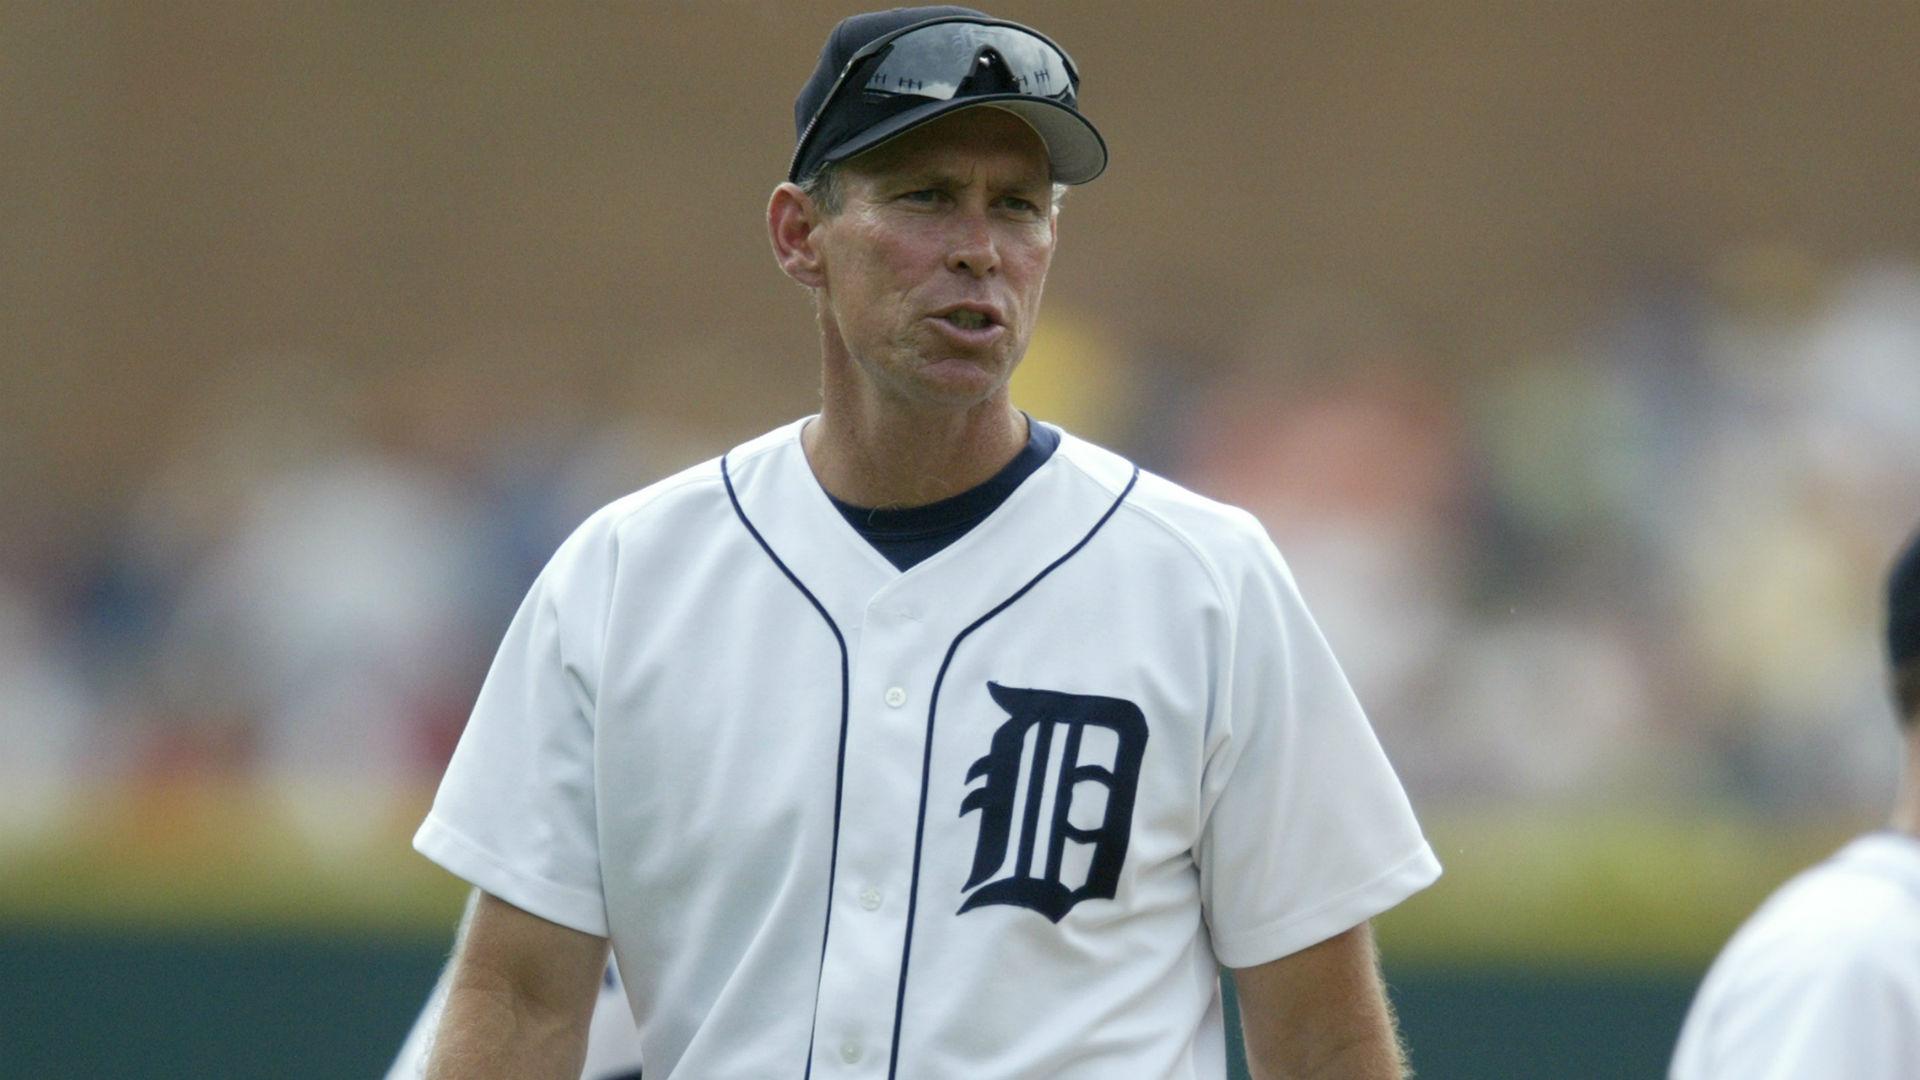 Alan Trammell, Special Assistant, DET Tigers - Hall of Fame